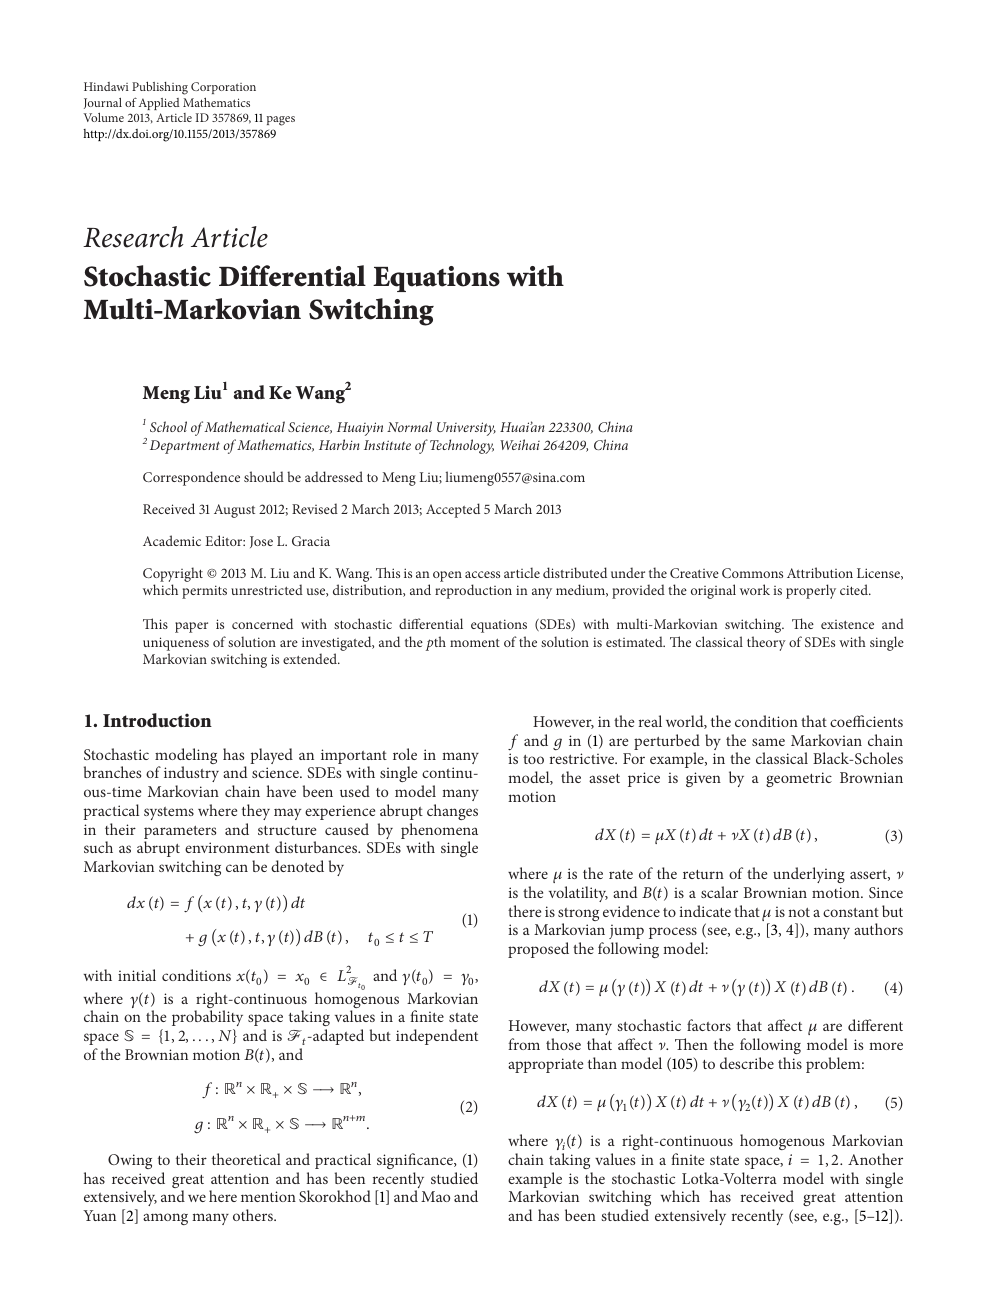 Stochastic Differential Equations With Multi Markovian Switching Topic Of Research Paper In Mathematics Download Scholarly Article Pdf And Read For Free On Cyberleninka Open Science Hub